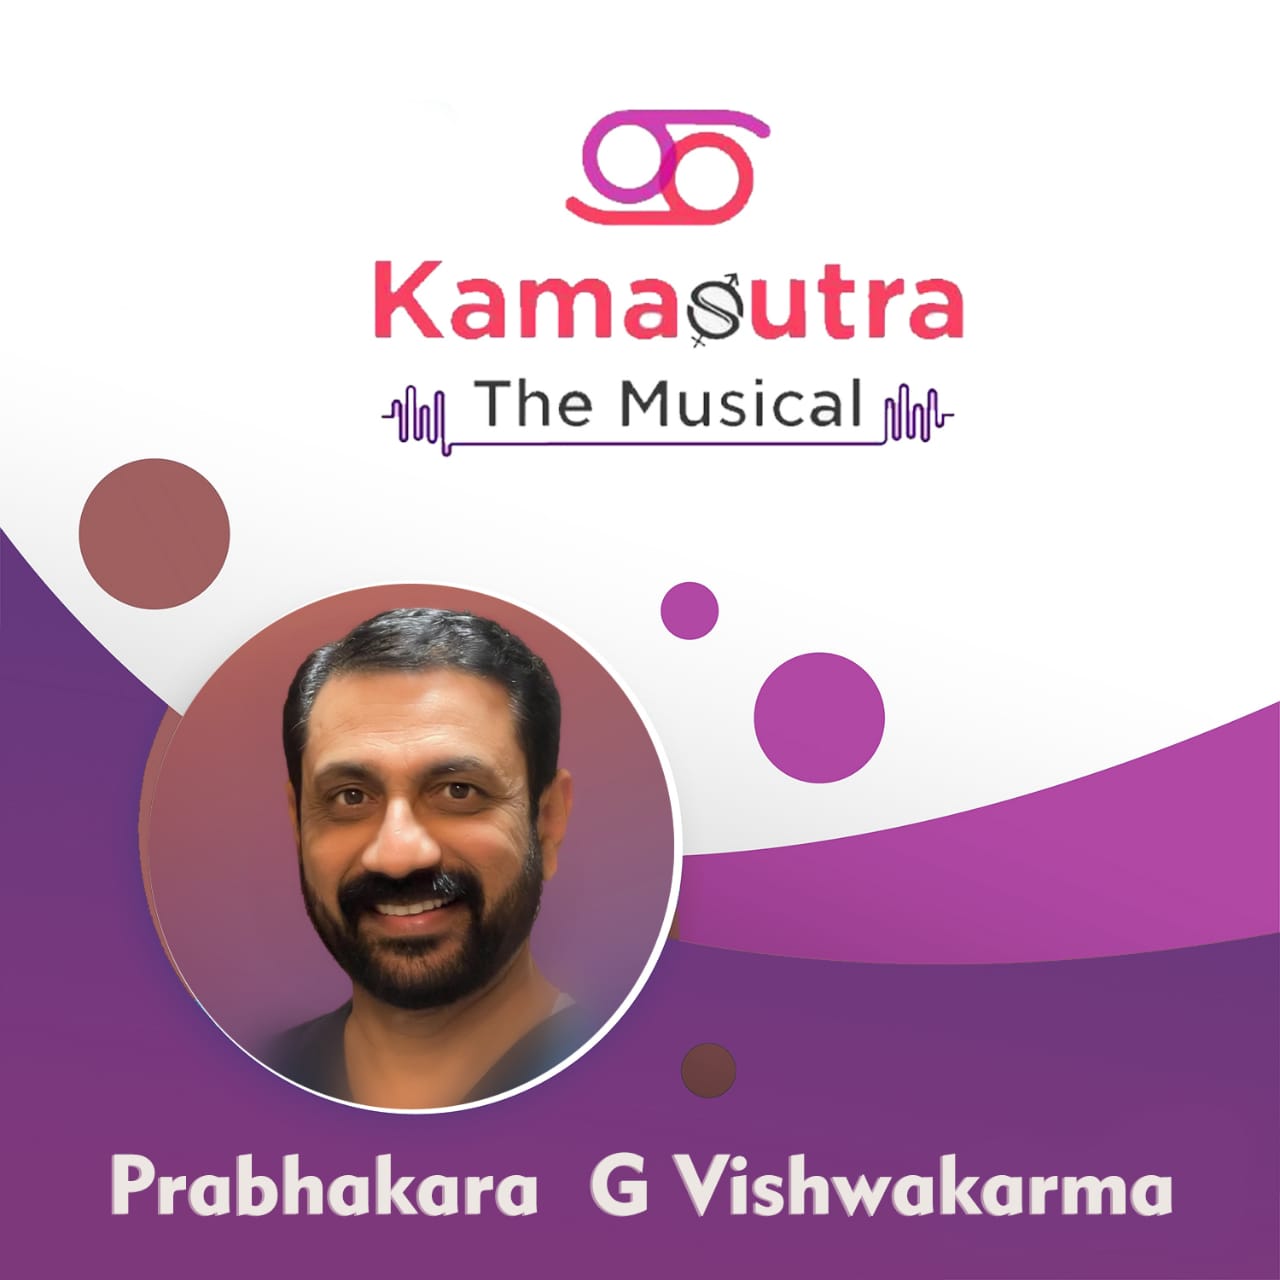 Dr. Prabhakara Govindachari Viswakarma Puts Together Music Based Project Kamasutra The Musical That Focusses on Sexual Well-Being